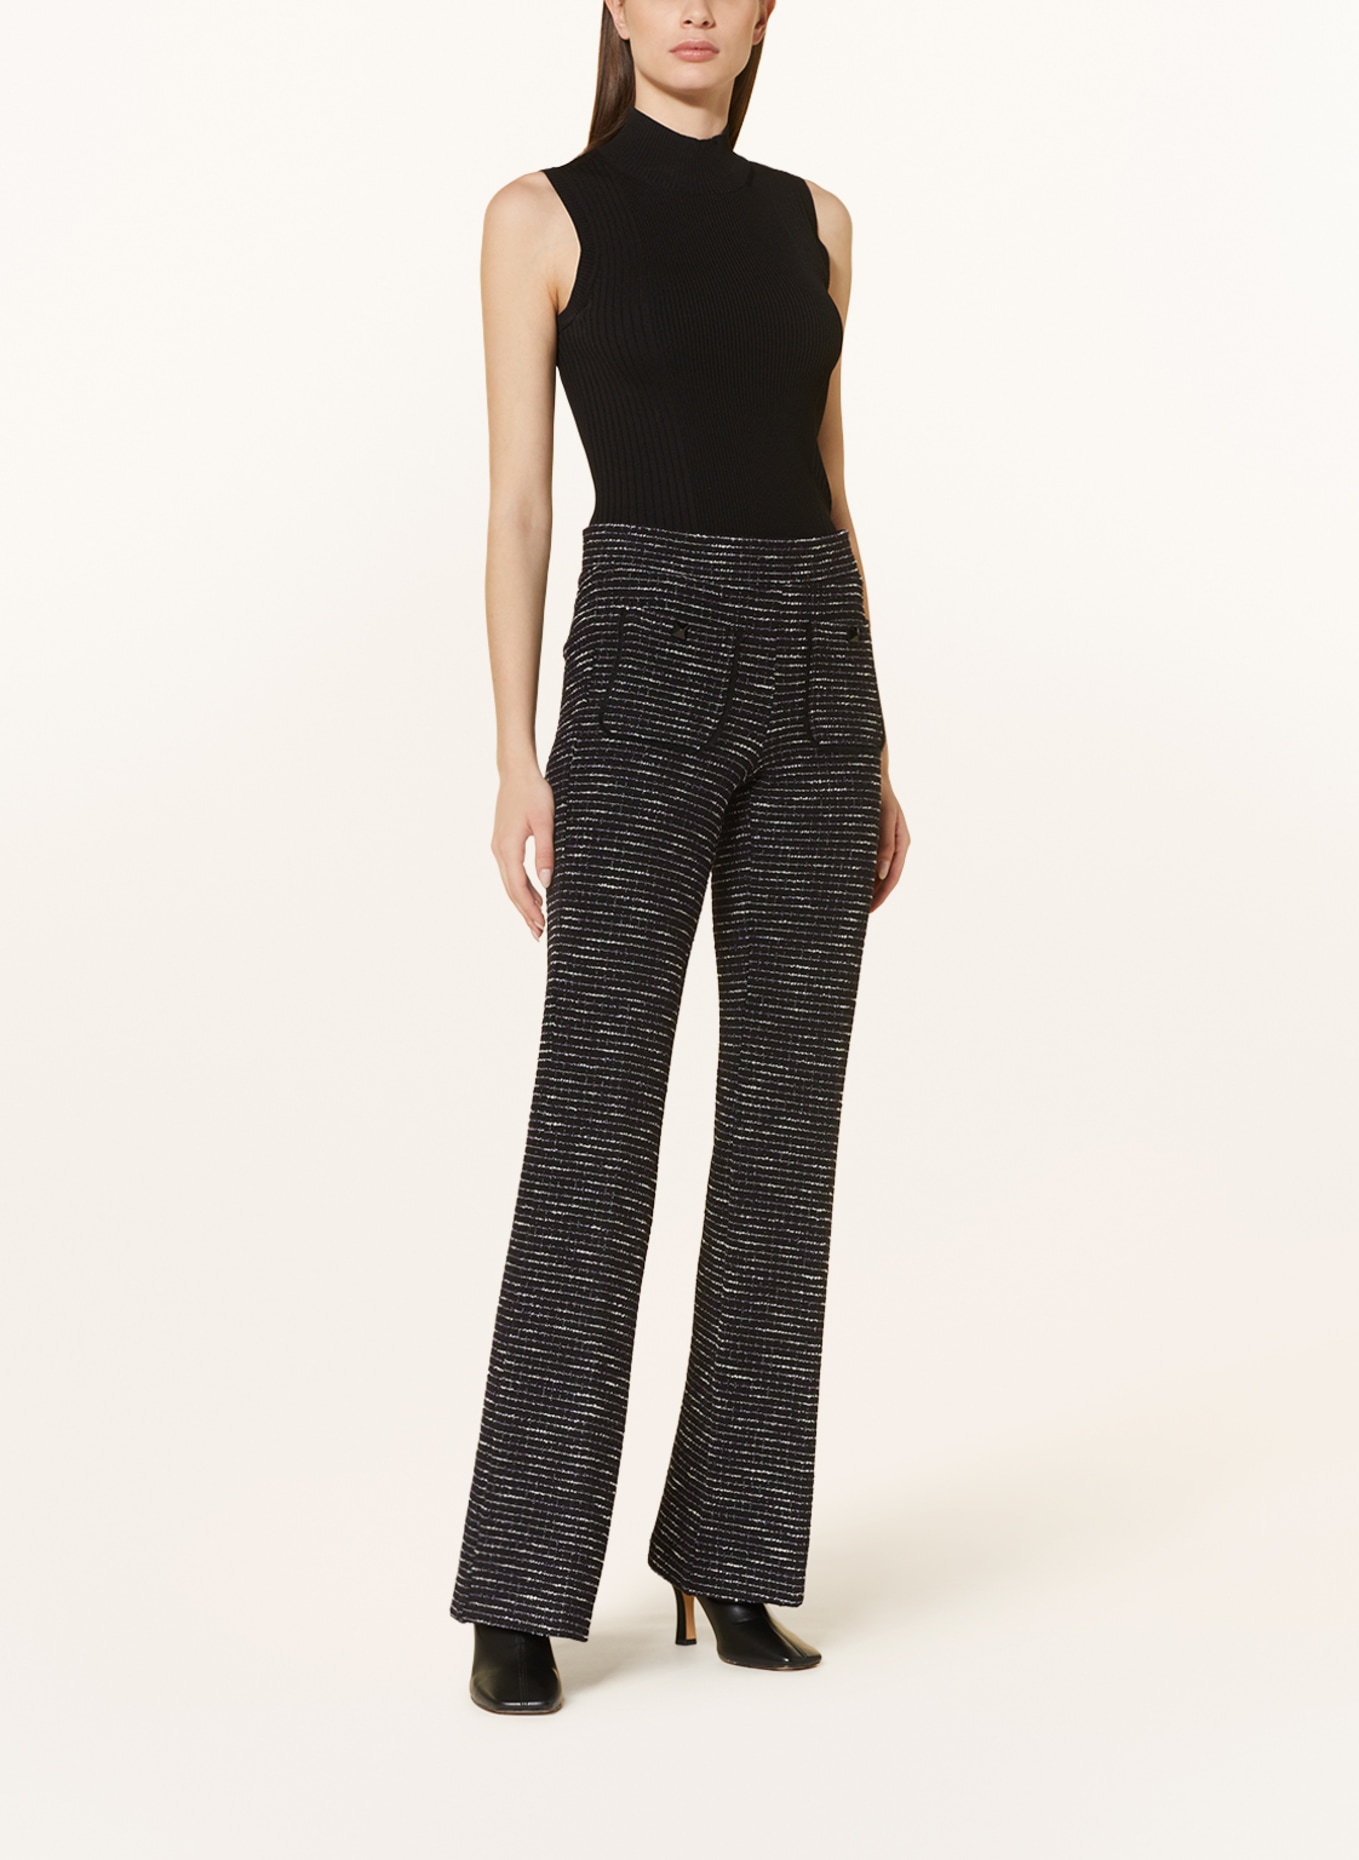 CAMBIO Wide leg trousers FRANCIS made of tweed, Color: BLACK/ WHITE/ PURPLE (Image 2)